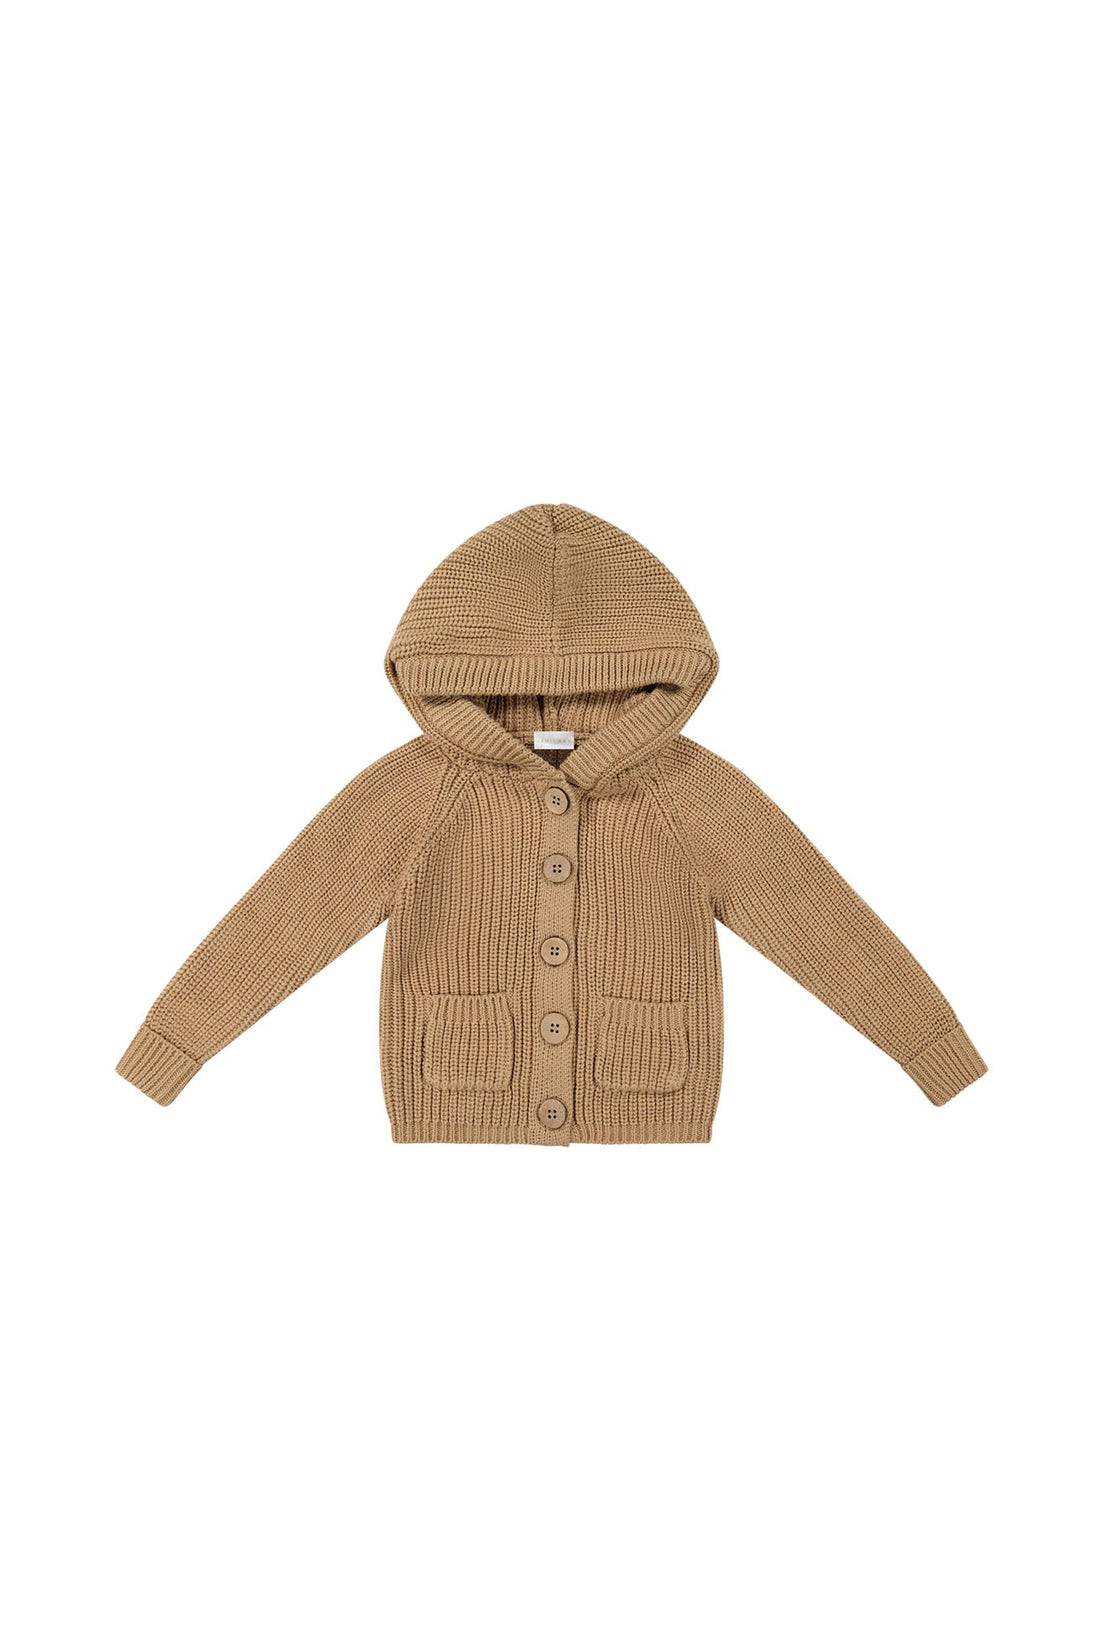 Luca Knitted Cardigan - Balm Childrens Cardigan from Jamie Kay NZ